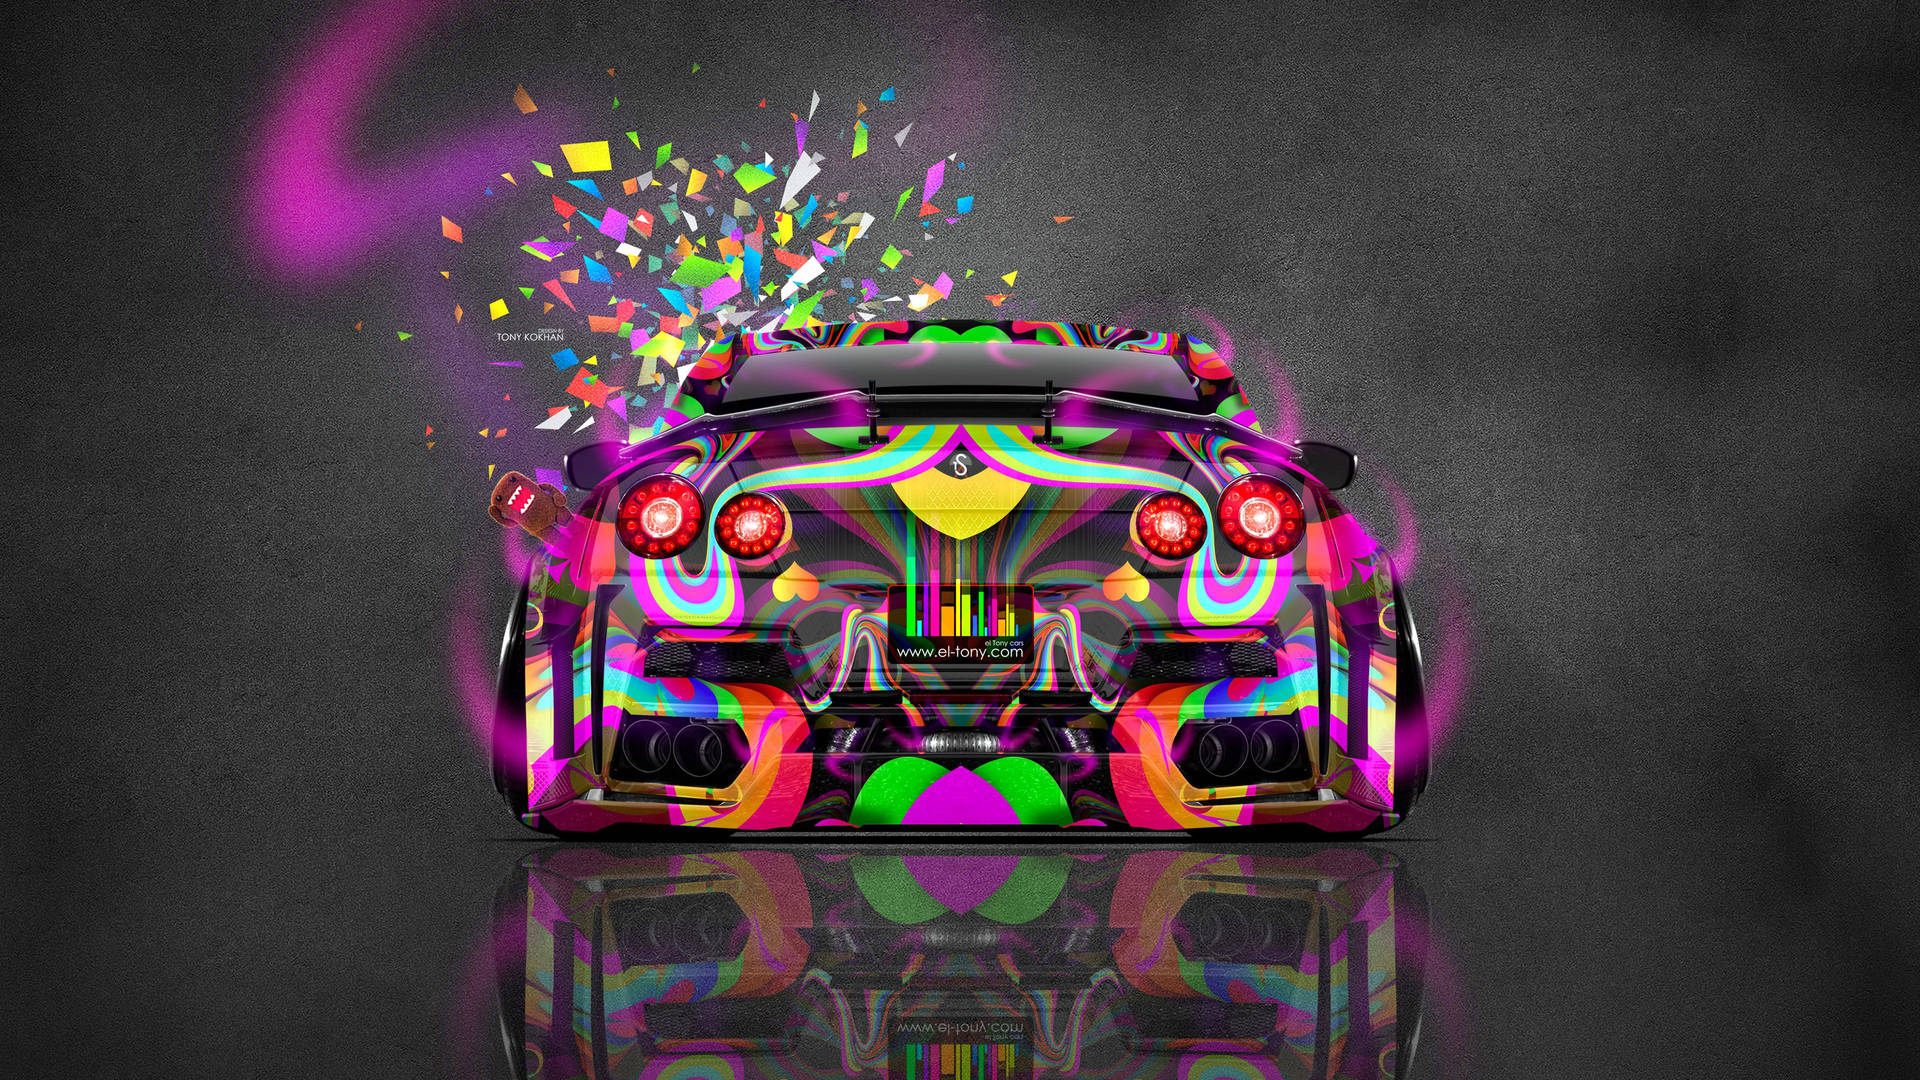 4k Jdm Nissan With Colorful Designs Background